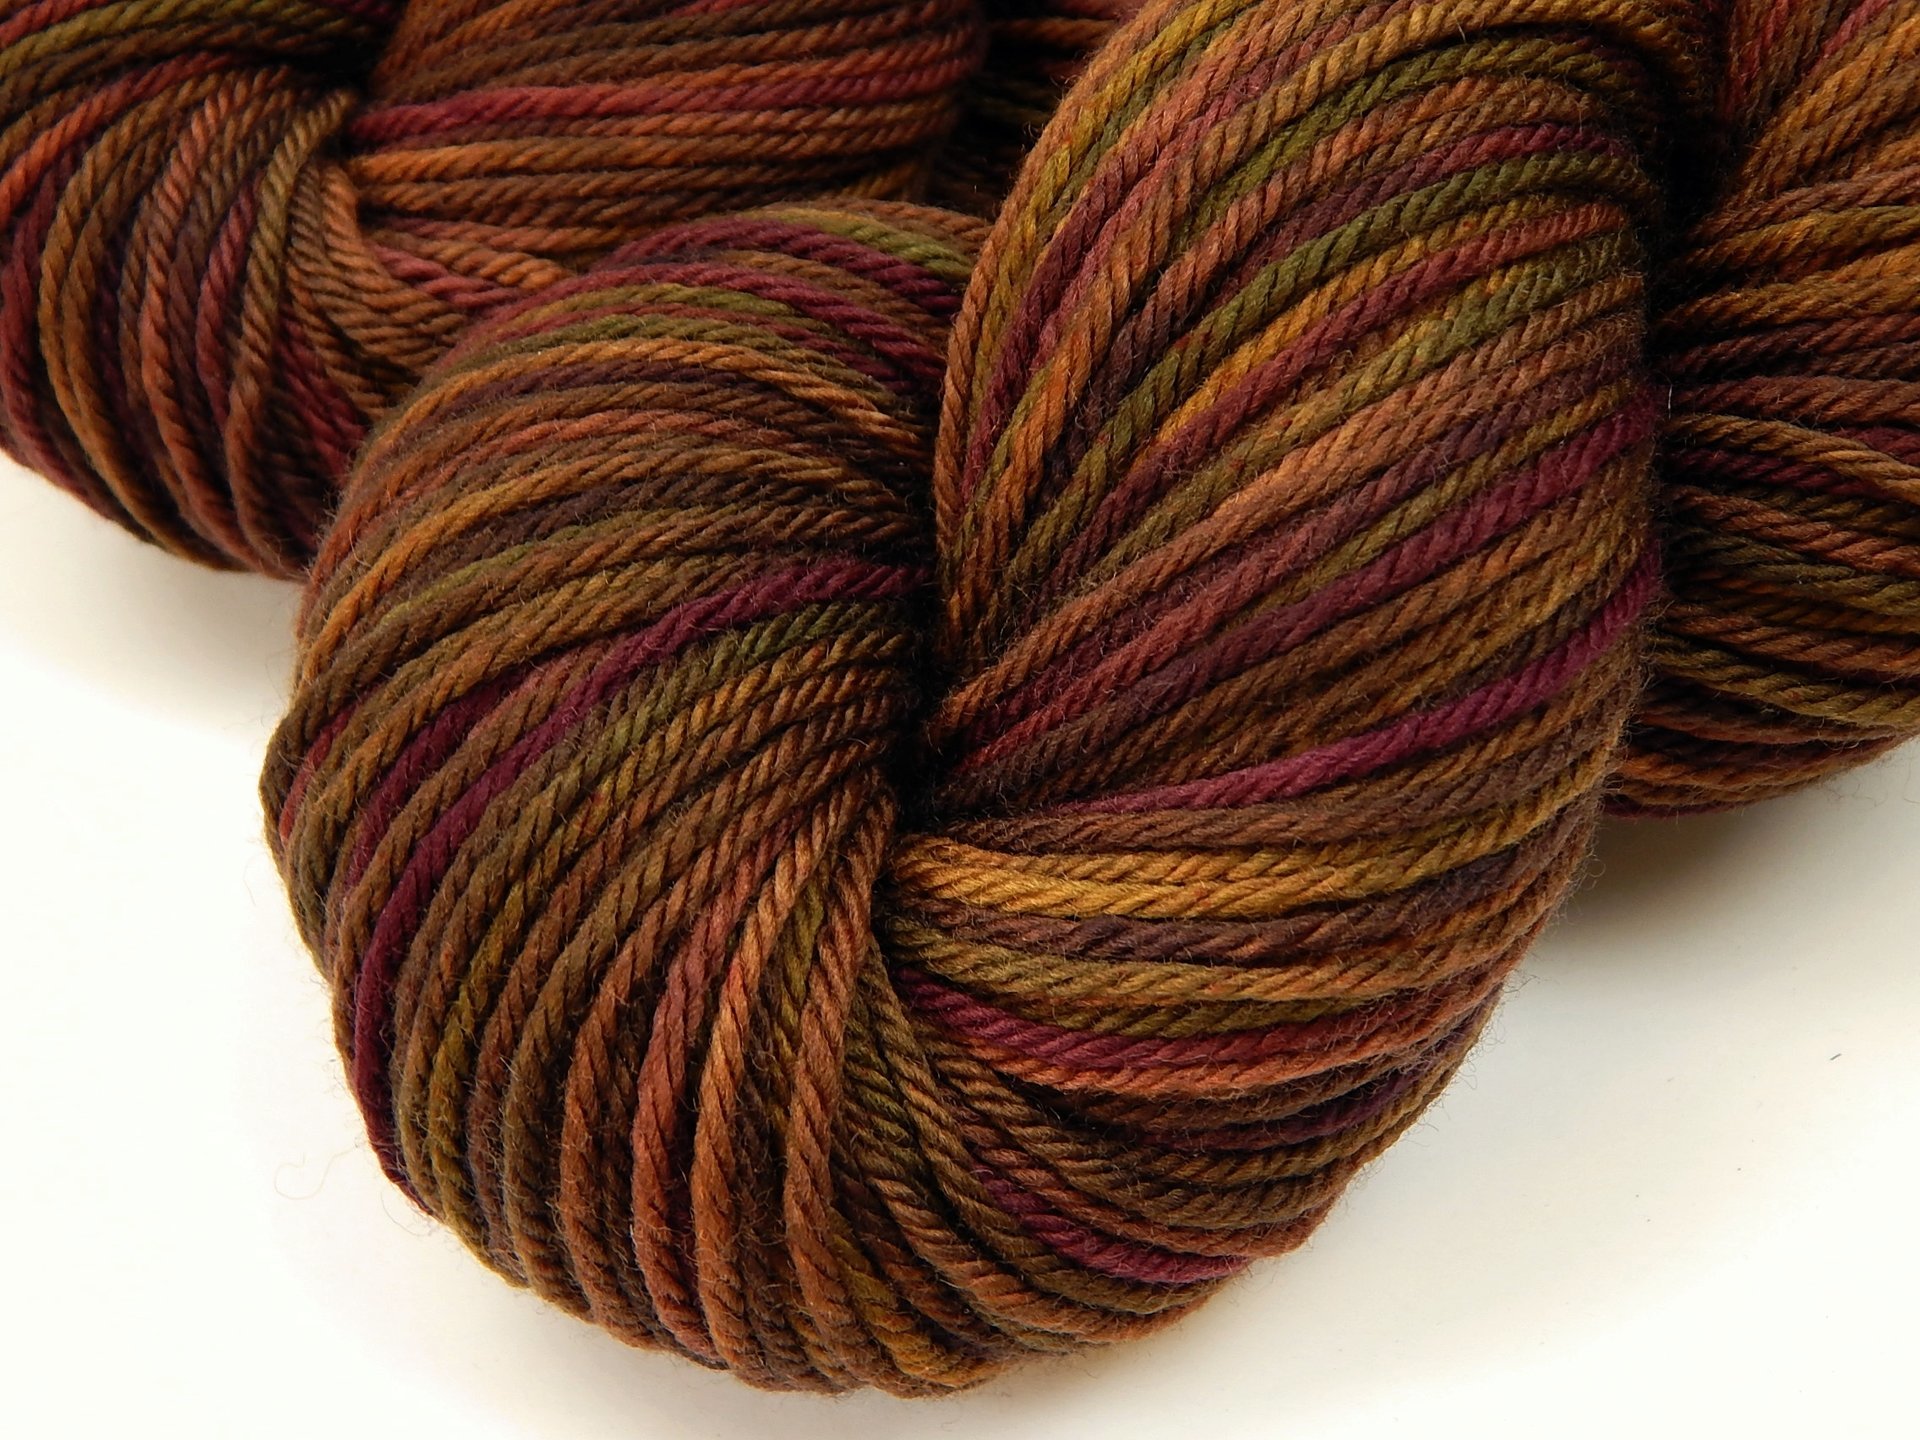 Hand Dyed Yarn, Worsted Weight Superwash Merino Wool - Clove Multi - Indie Dyer Brown Gold Red Knitting Crochet Supply, Autumn Fall Colors 